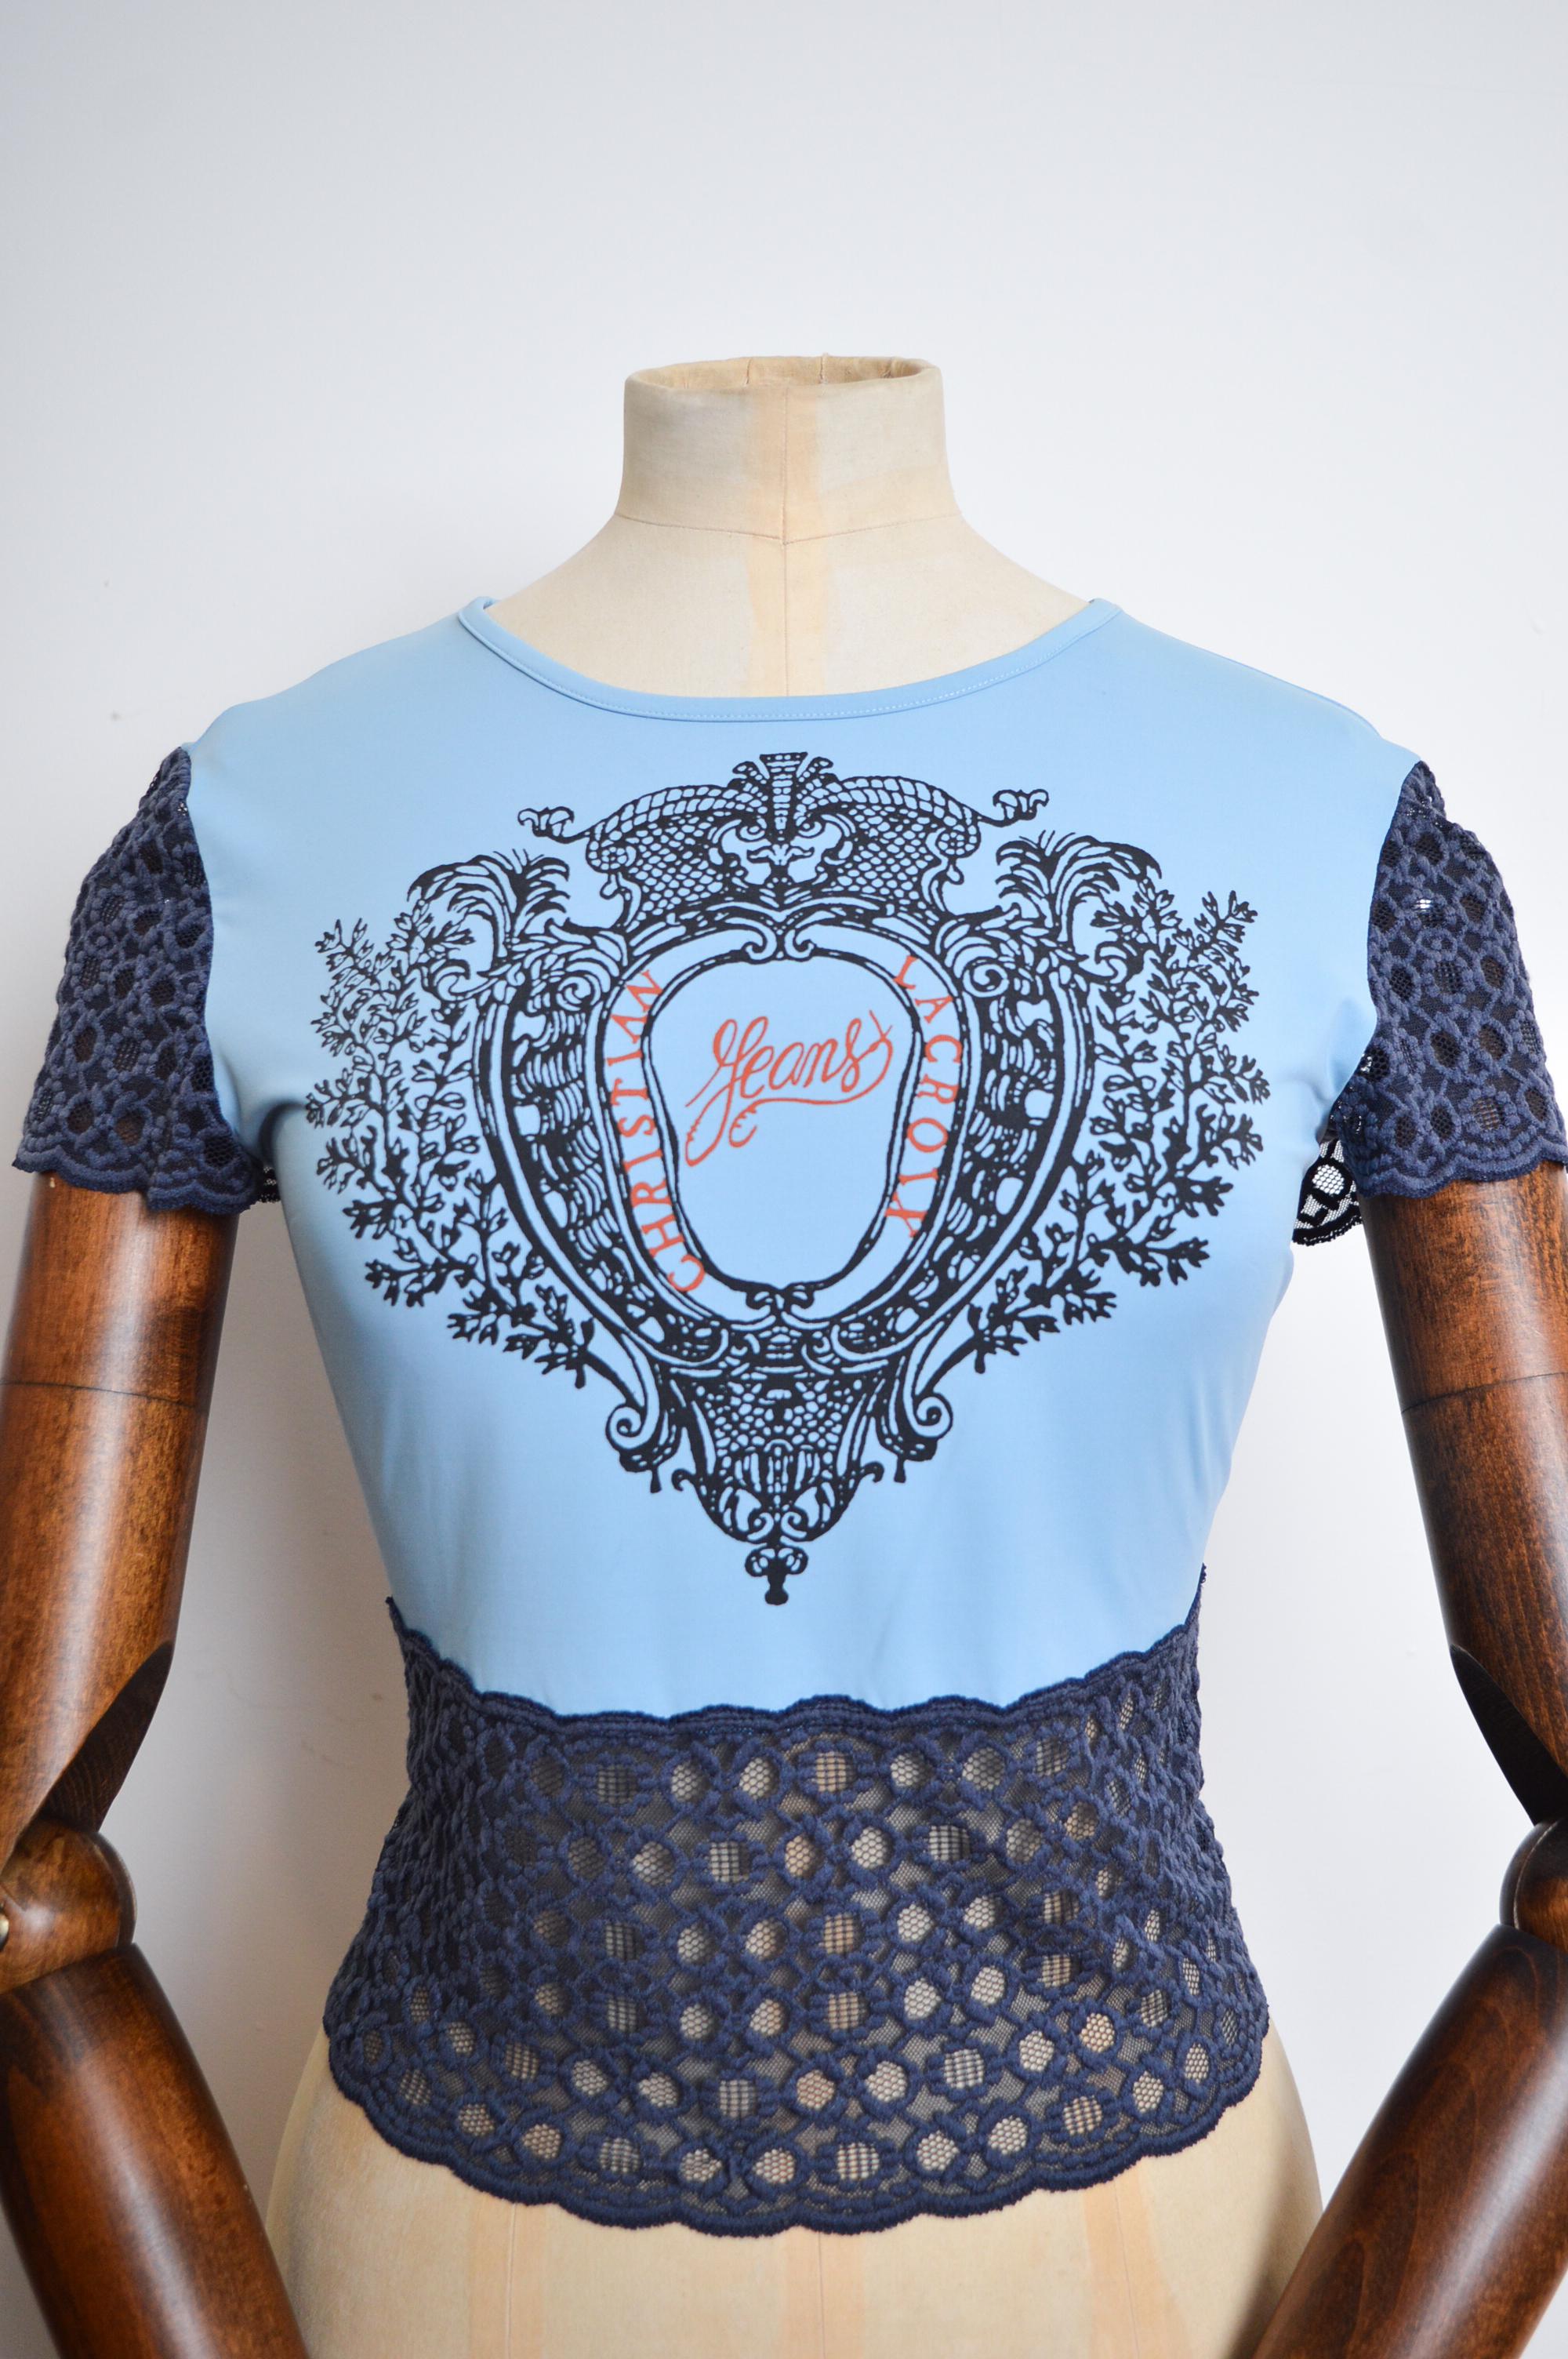 2000's Christian Lacroix baby blue, stretchy, fitted Baby Tee with lace detailed trim and printed Logo front.  

Made in Italy.

Pit to pit - 16